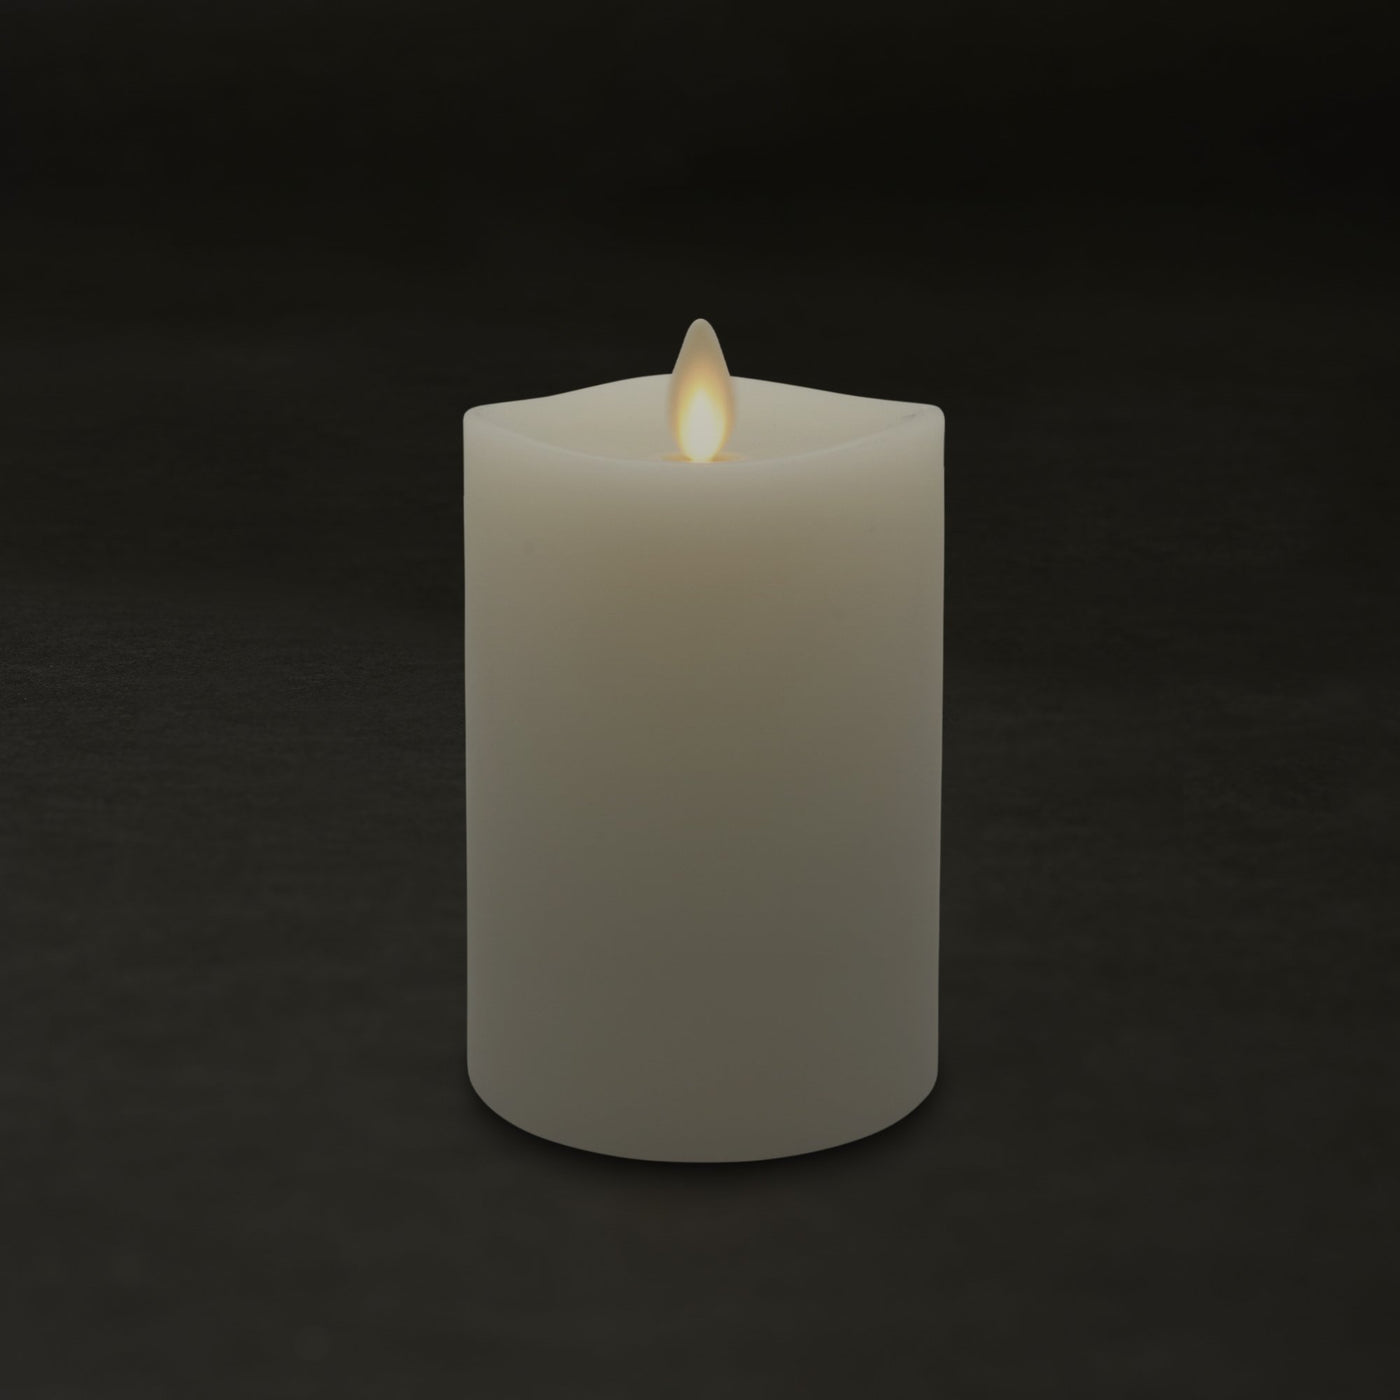 Matchless Candle Co. Indoor LED Candle - 7.6 x 14.0cm